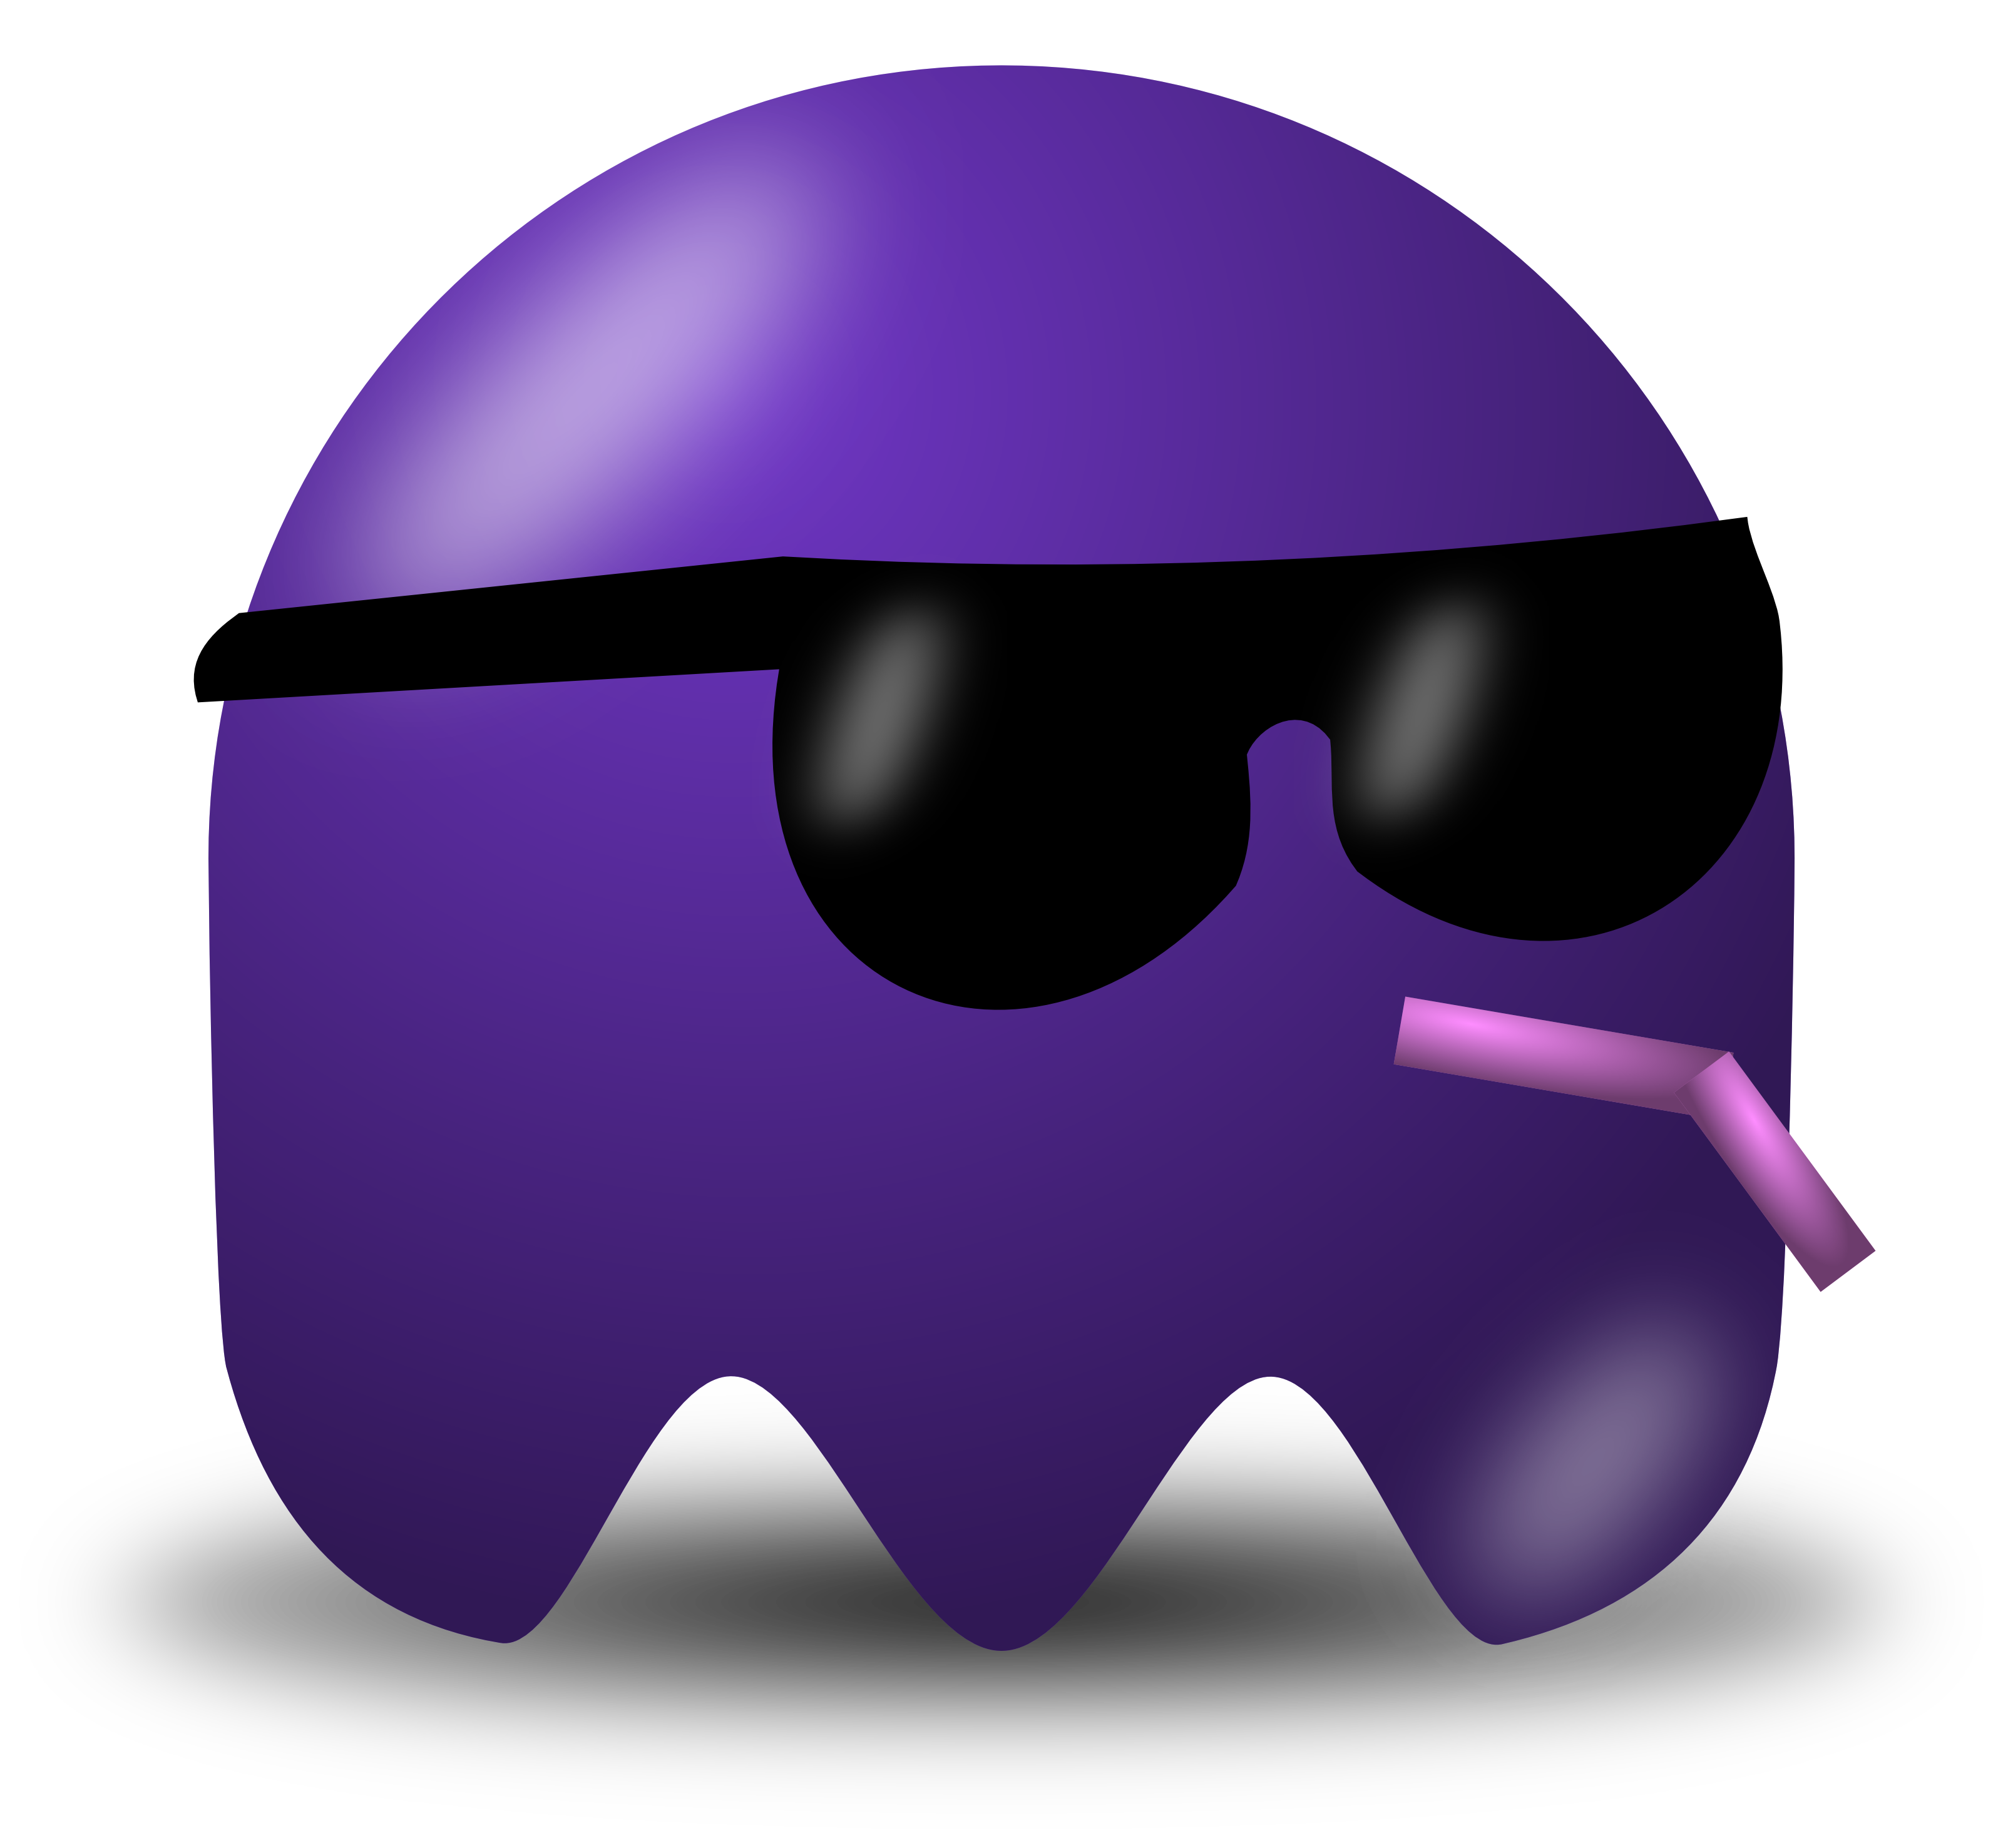 Cool Purple Avatar Character Wearing Shades - Free Vector Clipart